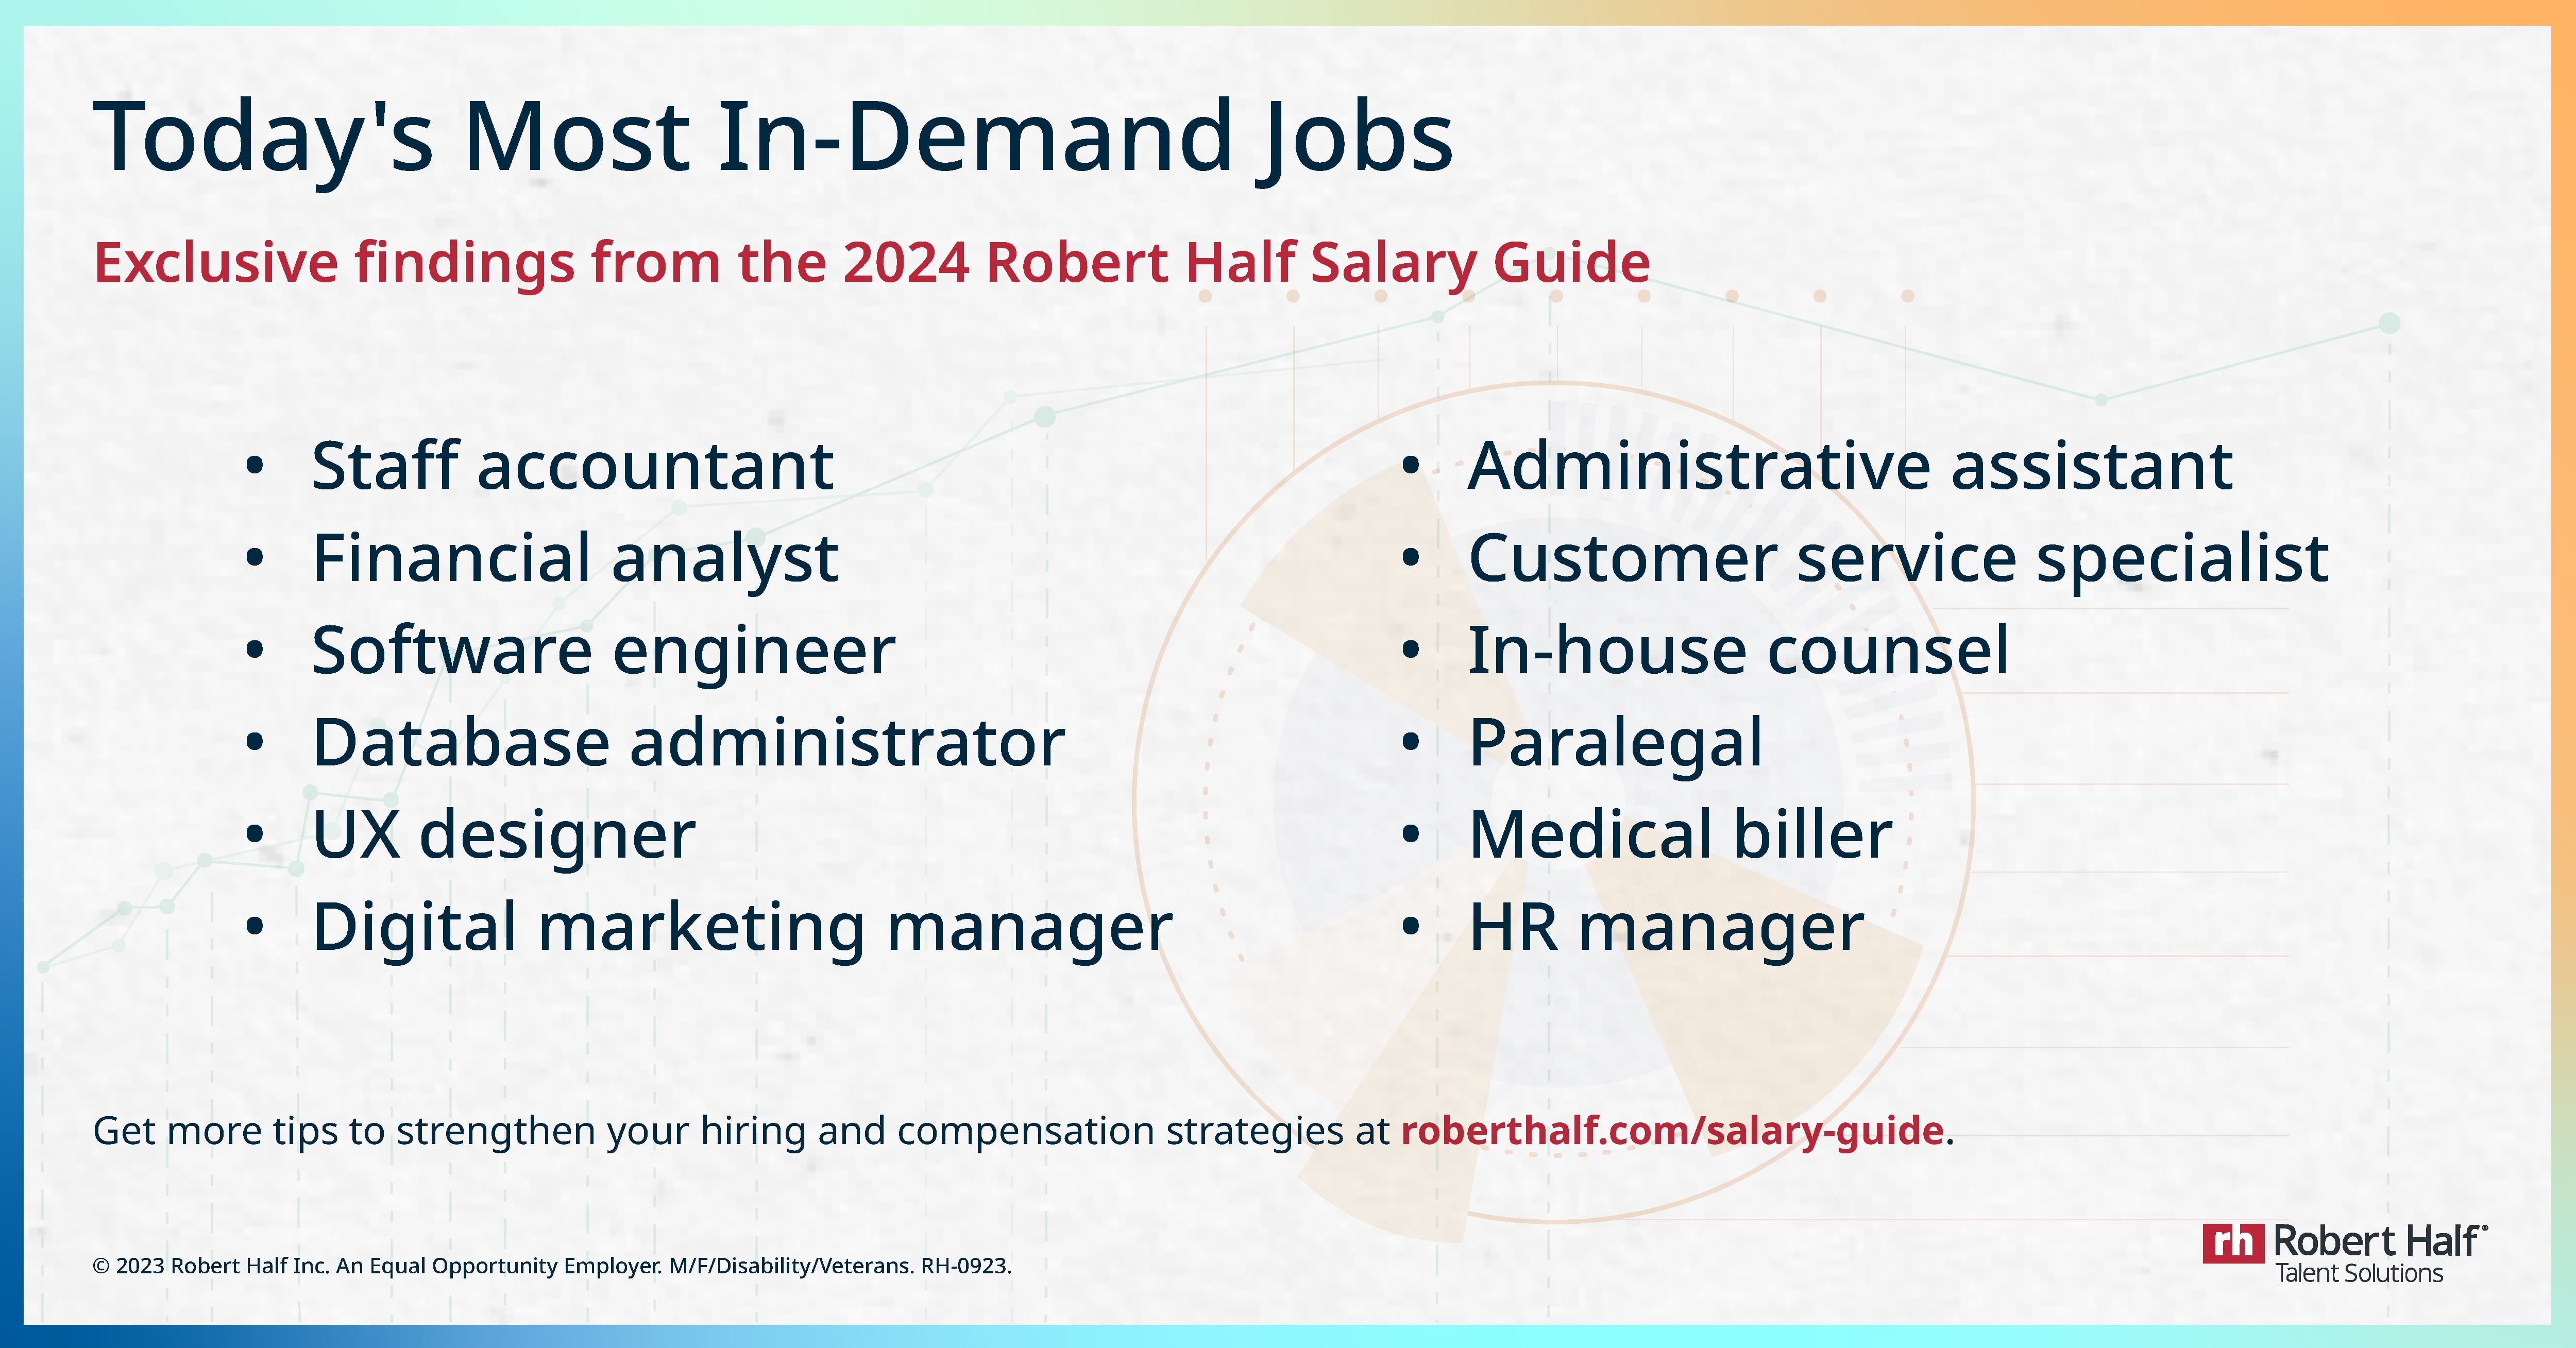 Today's most in-demand jobs